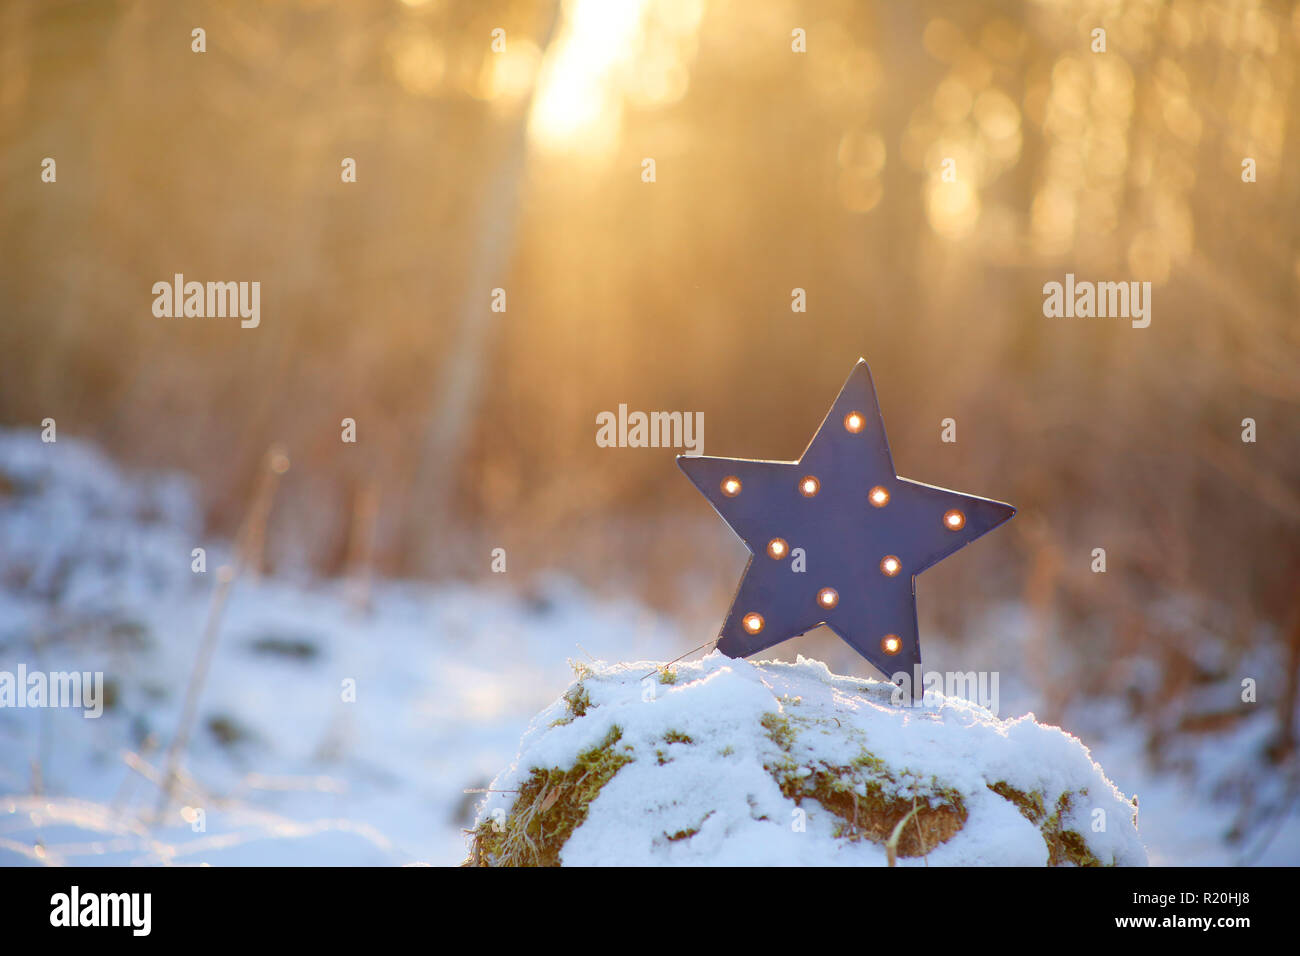 Focus on decorative modern blue star shape lamp with lots of burning small light bulbs on, outdoors on snowy ground, with nice back light from sun set Stock Photo